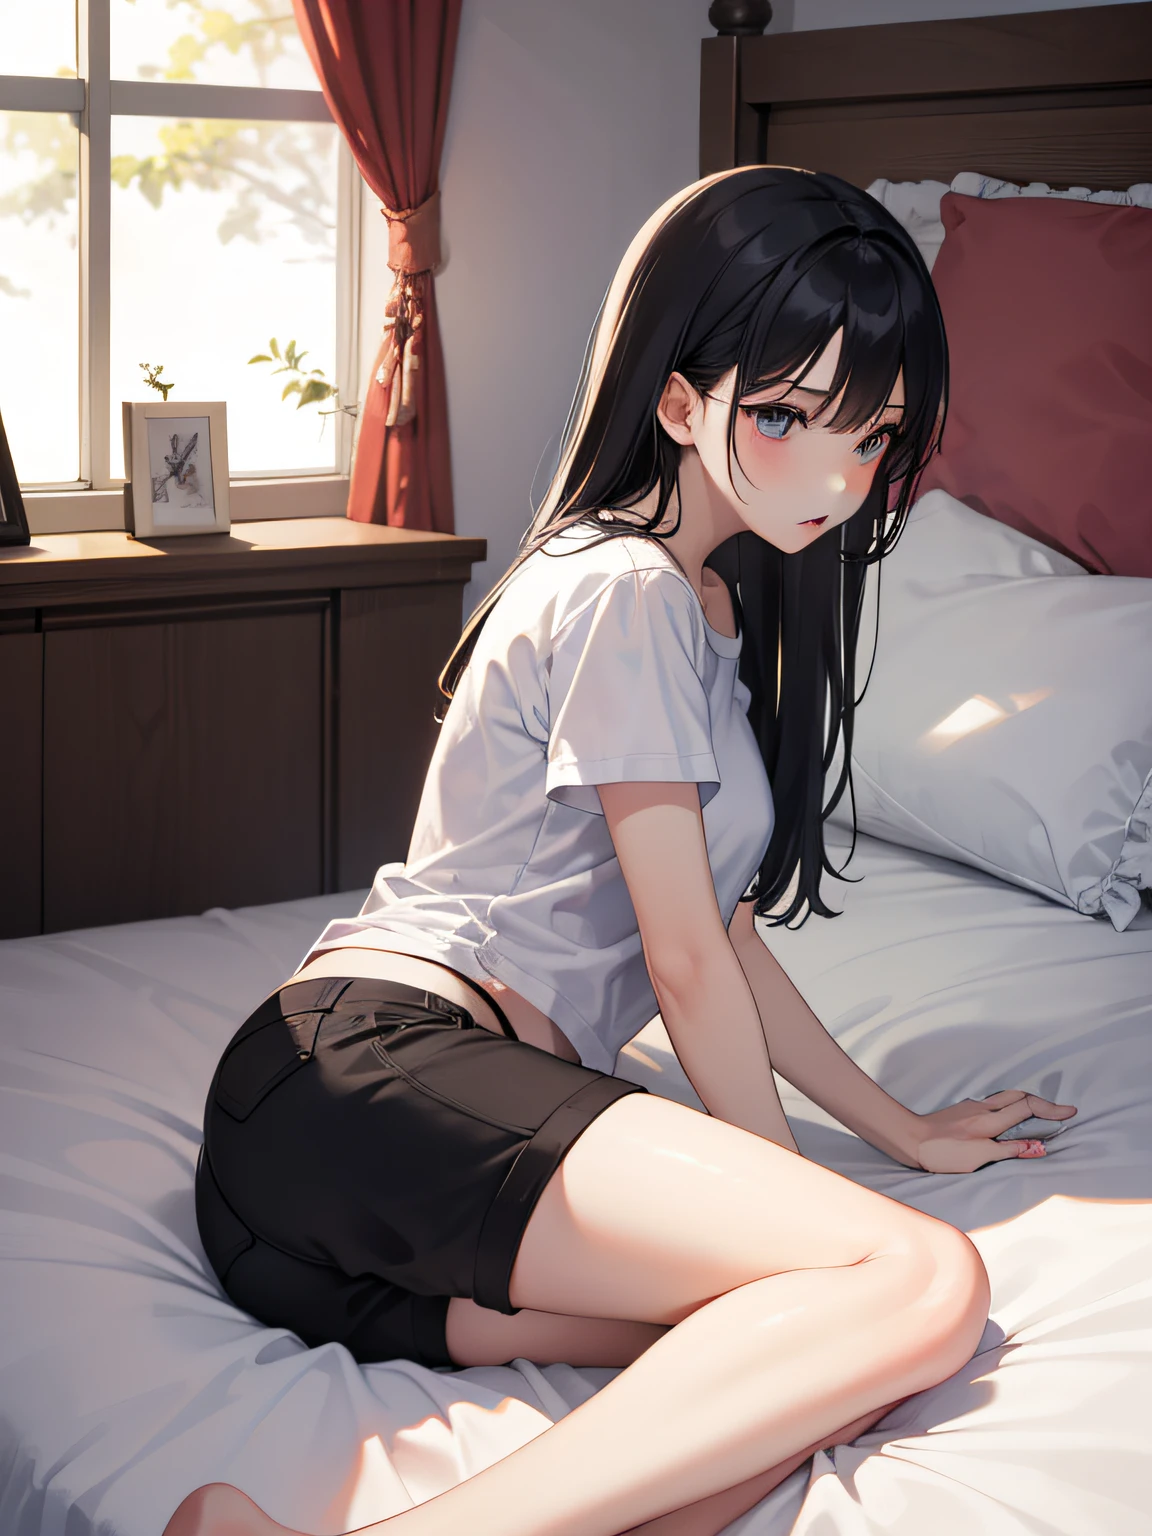 She was woken up，A quarrel is heard in the blur，Young beautiful girl lying on bed，Wear black shorts and a white t-shirt。